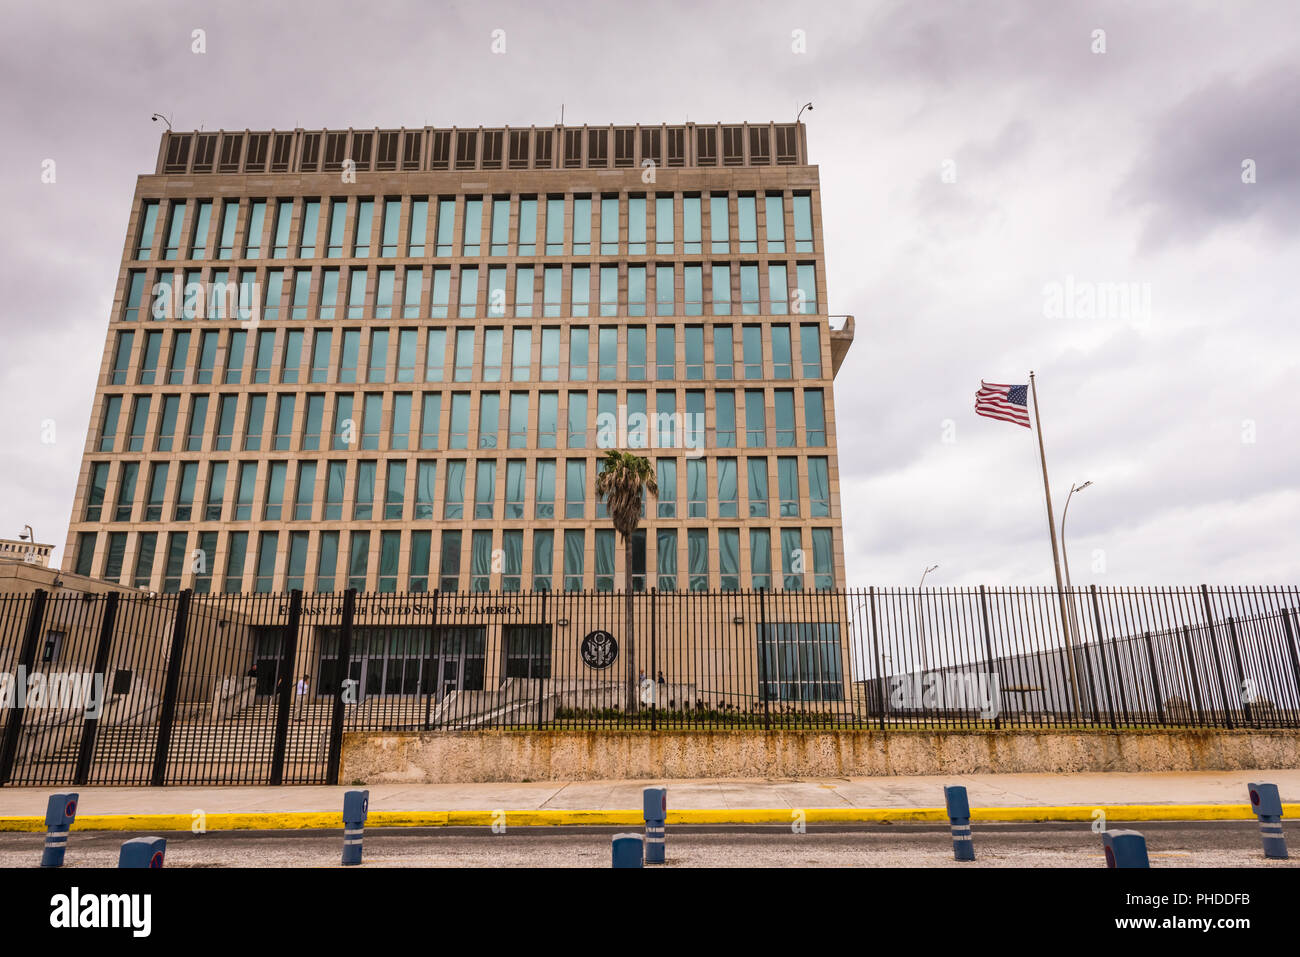 Havana, Cuba / March 21, 2016: The Embassy of the United States of America in Havana is the United States of America's diplomatic mission in Cuba. Stock Photo